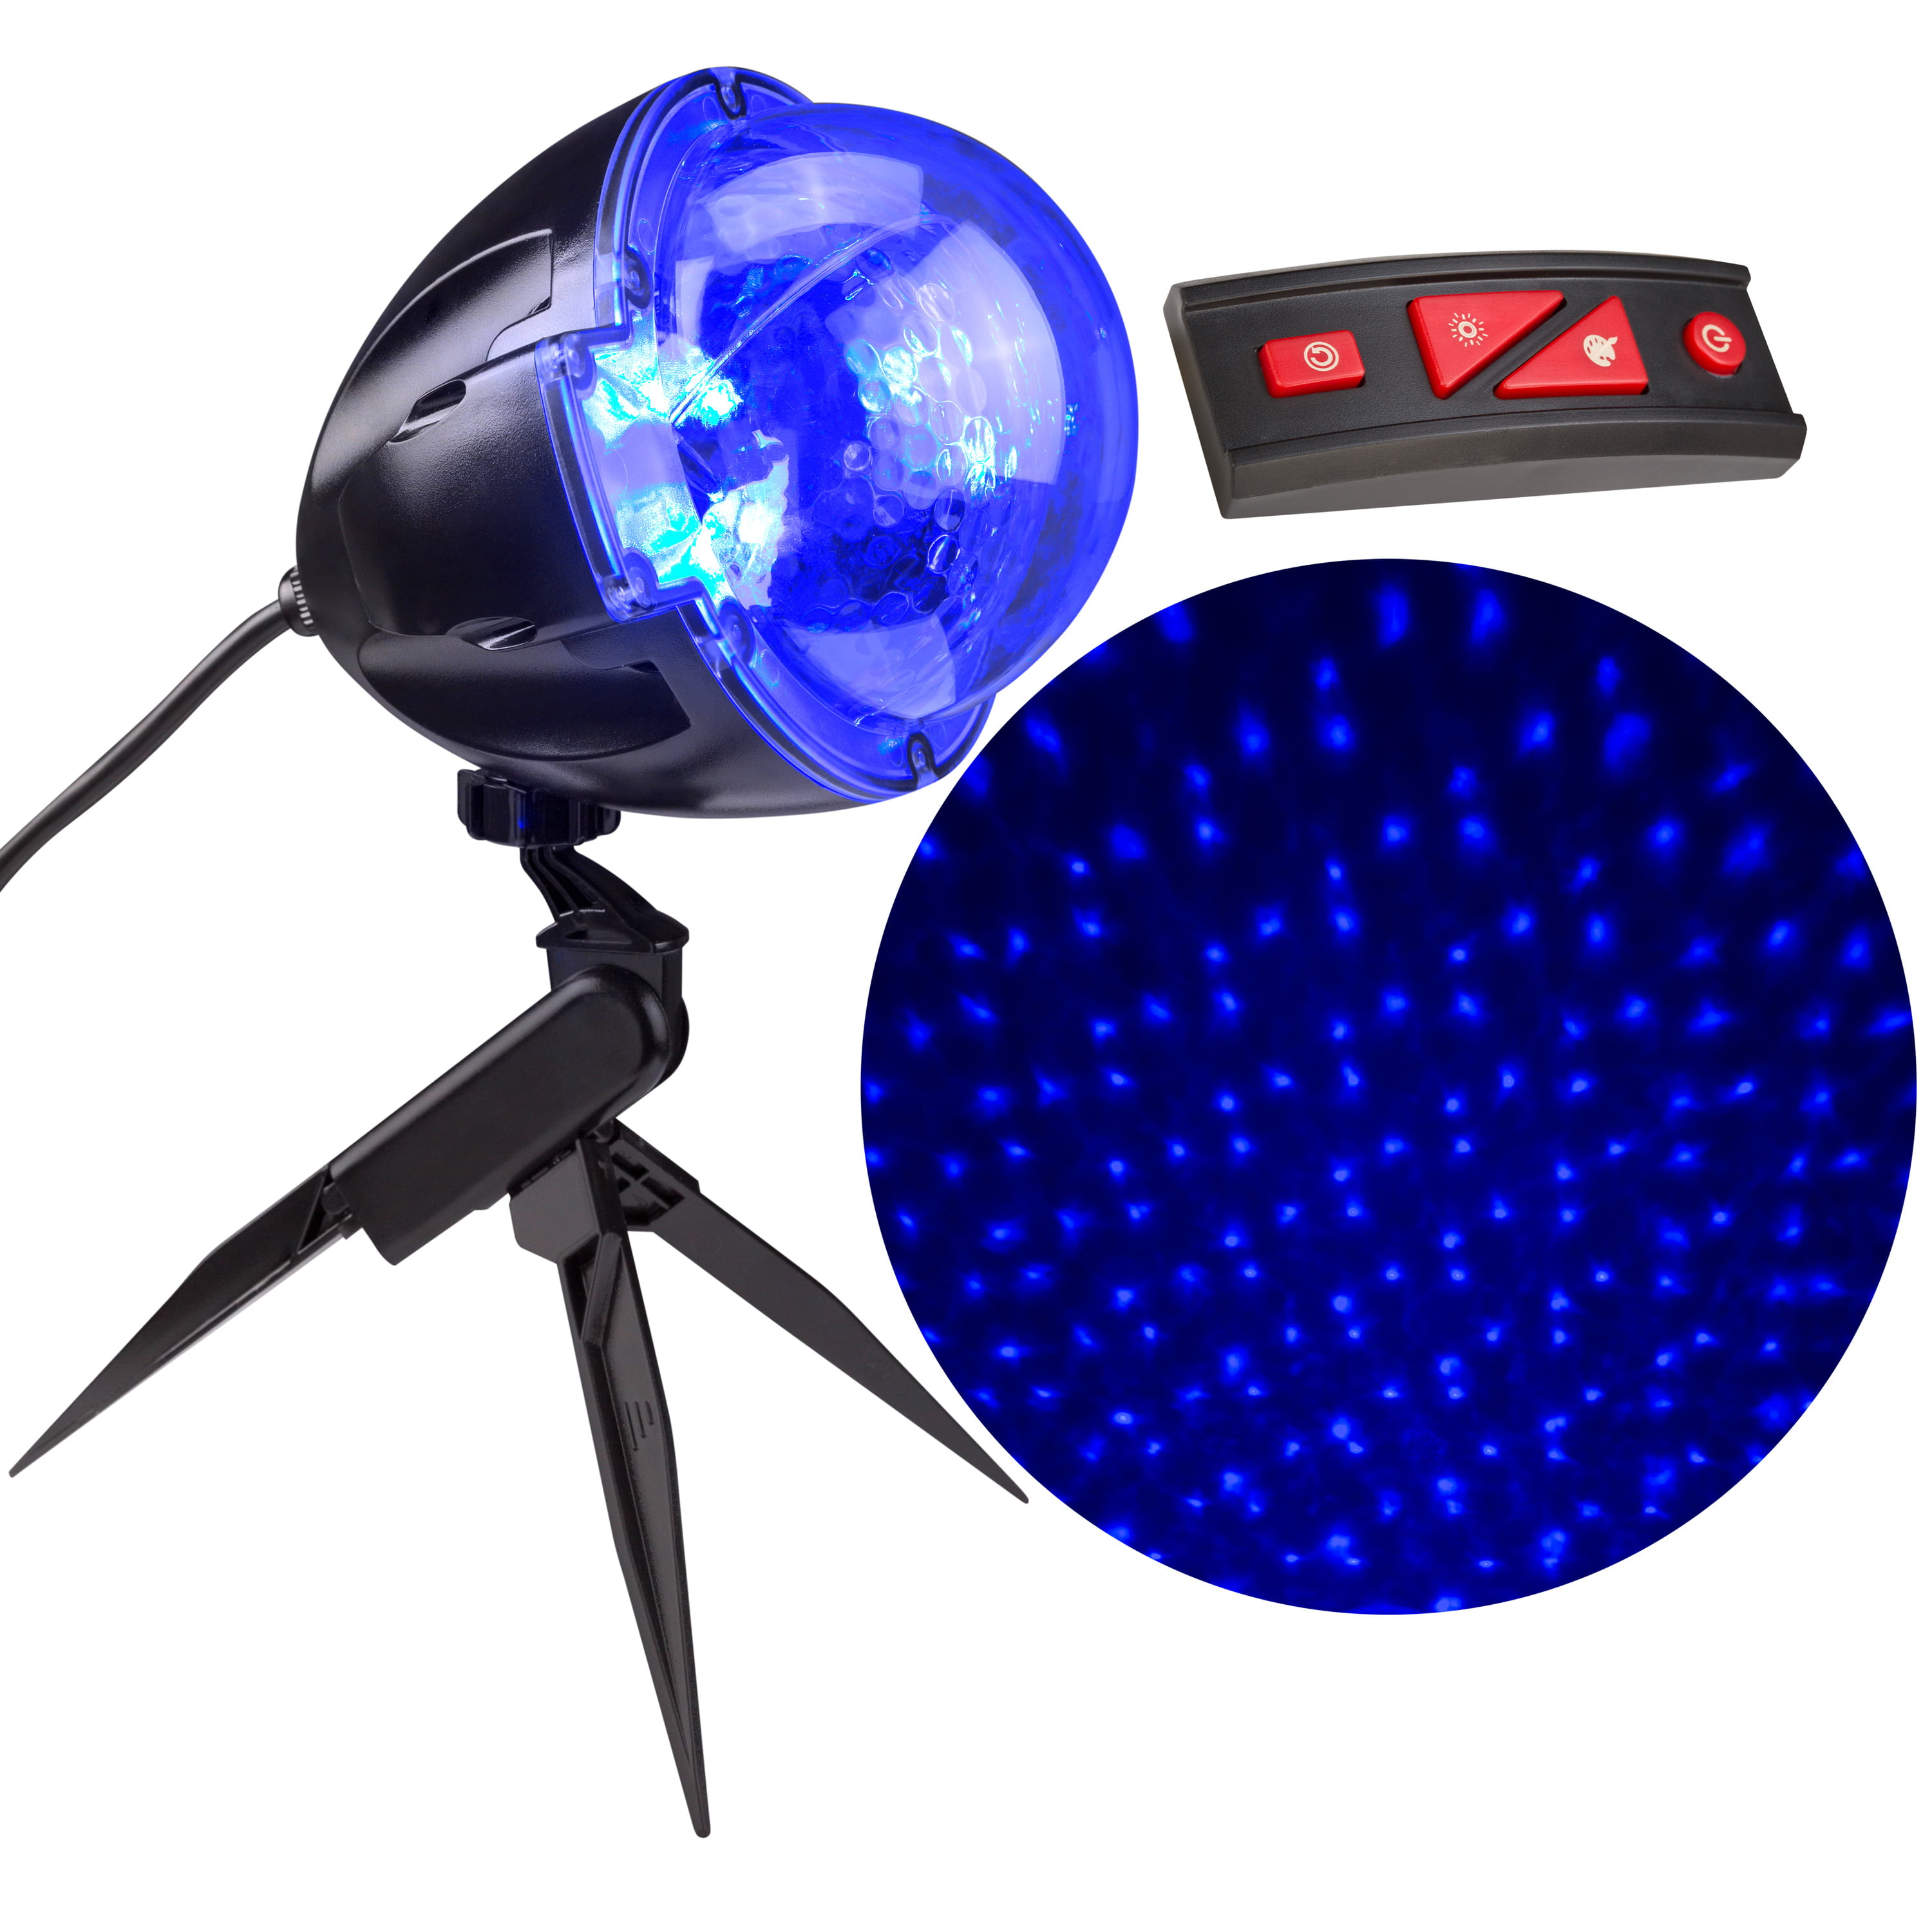 Christmas Lightshow Points of Light Projector with 400 Lights for sale online 